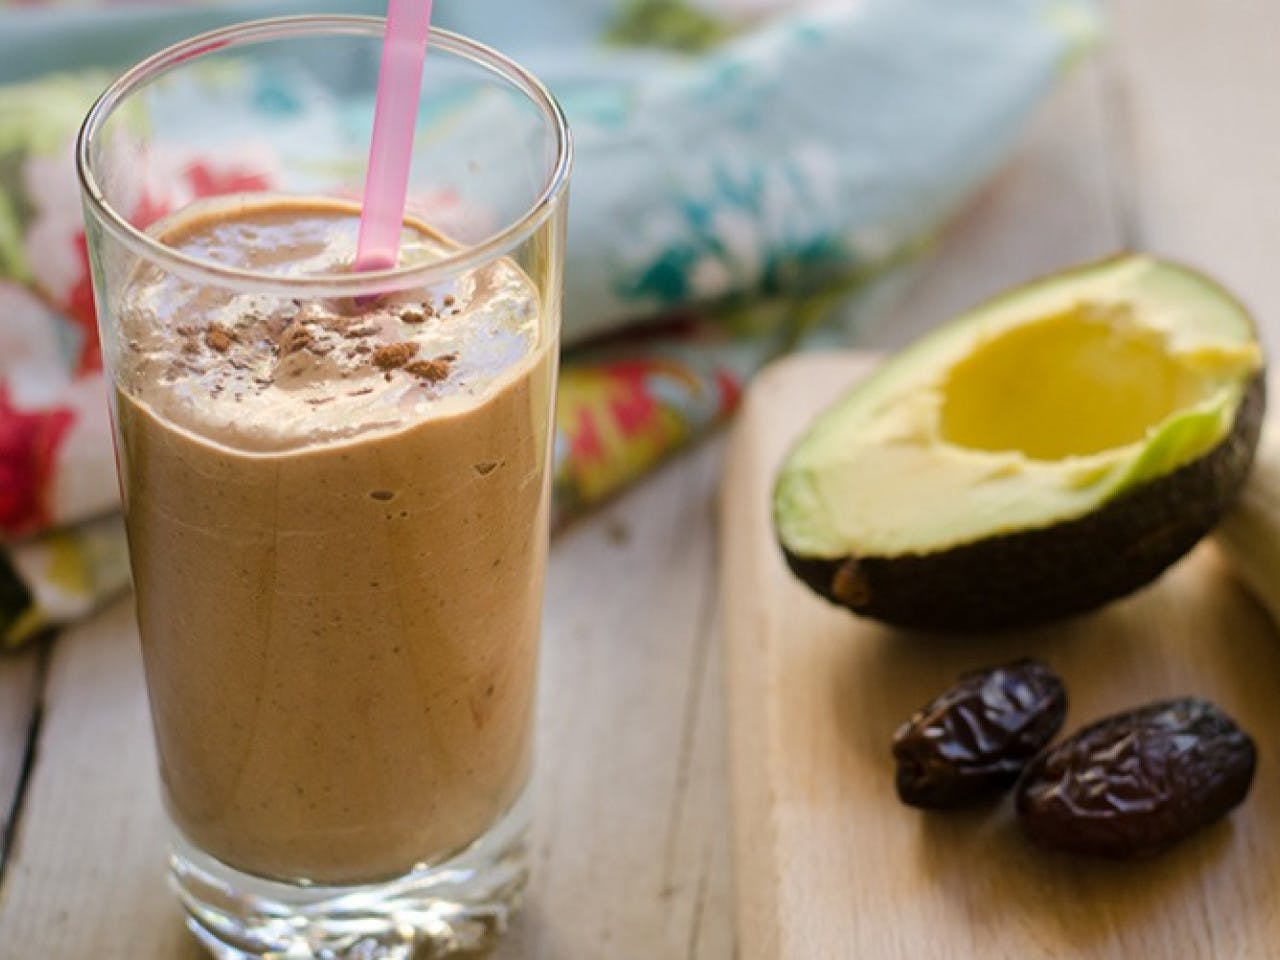 Chocolate and avocado breakfast smoothie